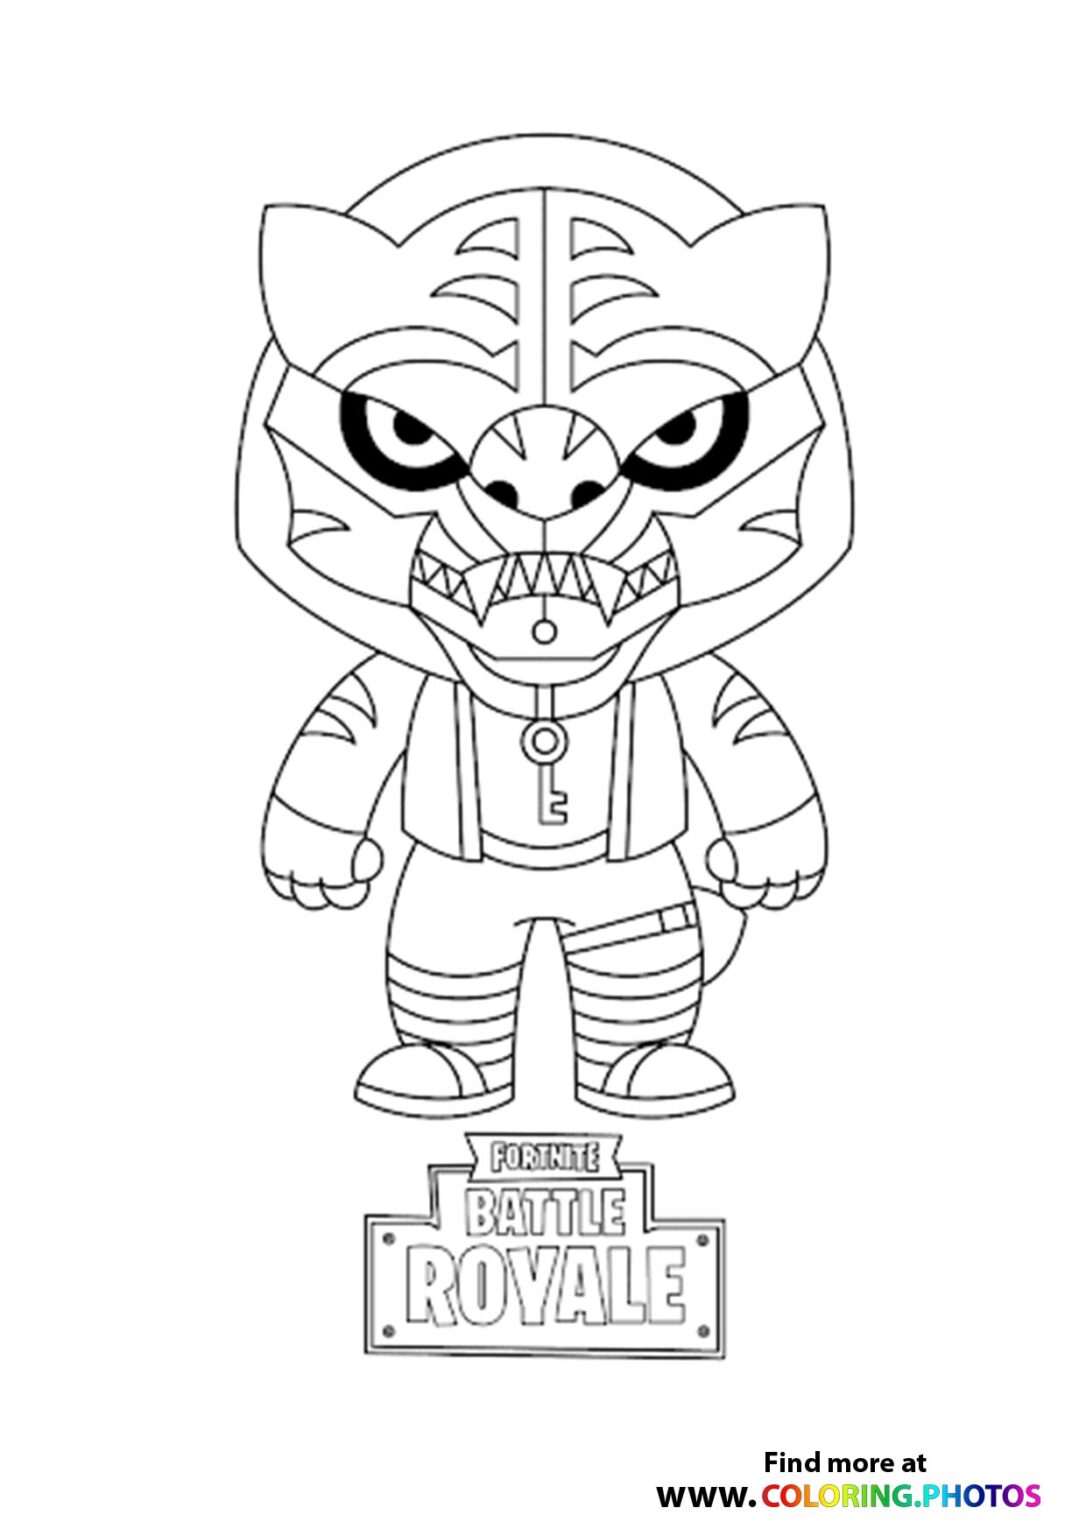 Free Drift Fortnite Coloring Page For Kids Coloring Pages For Kids ...